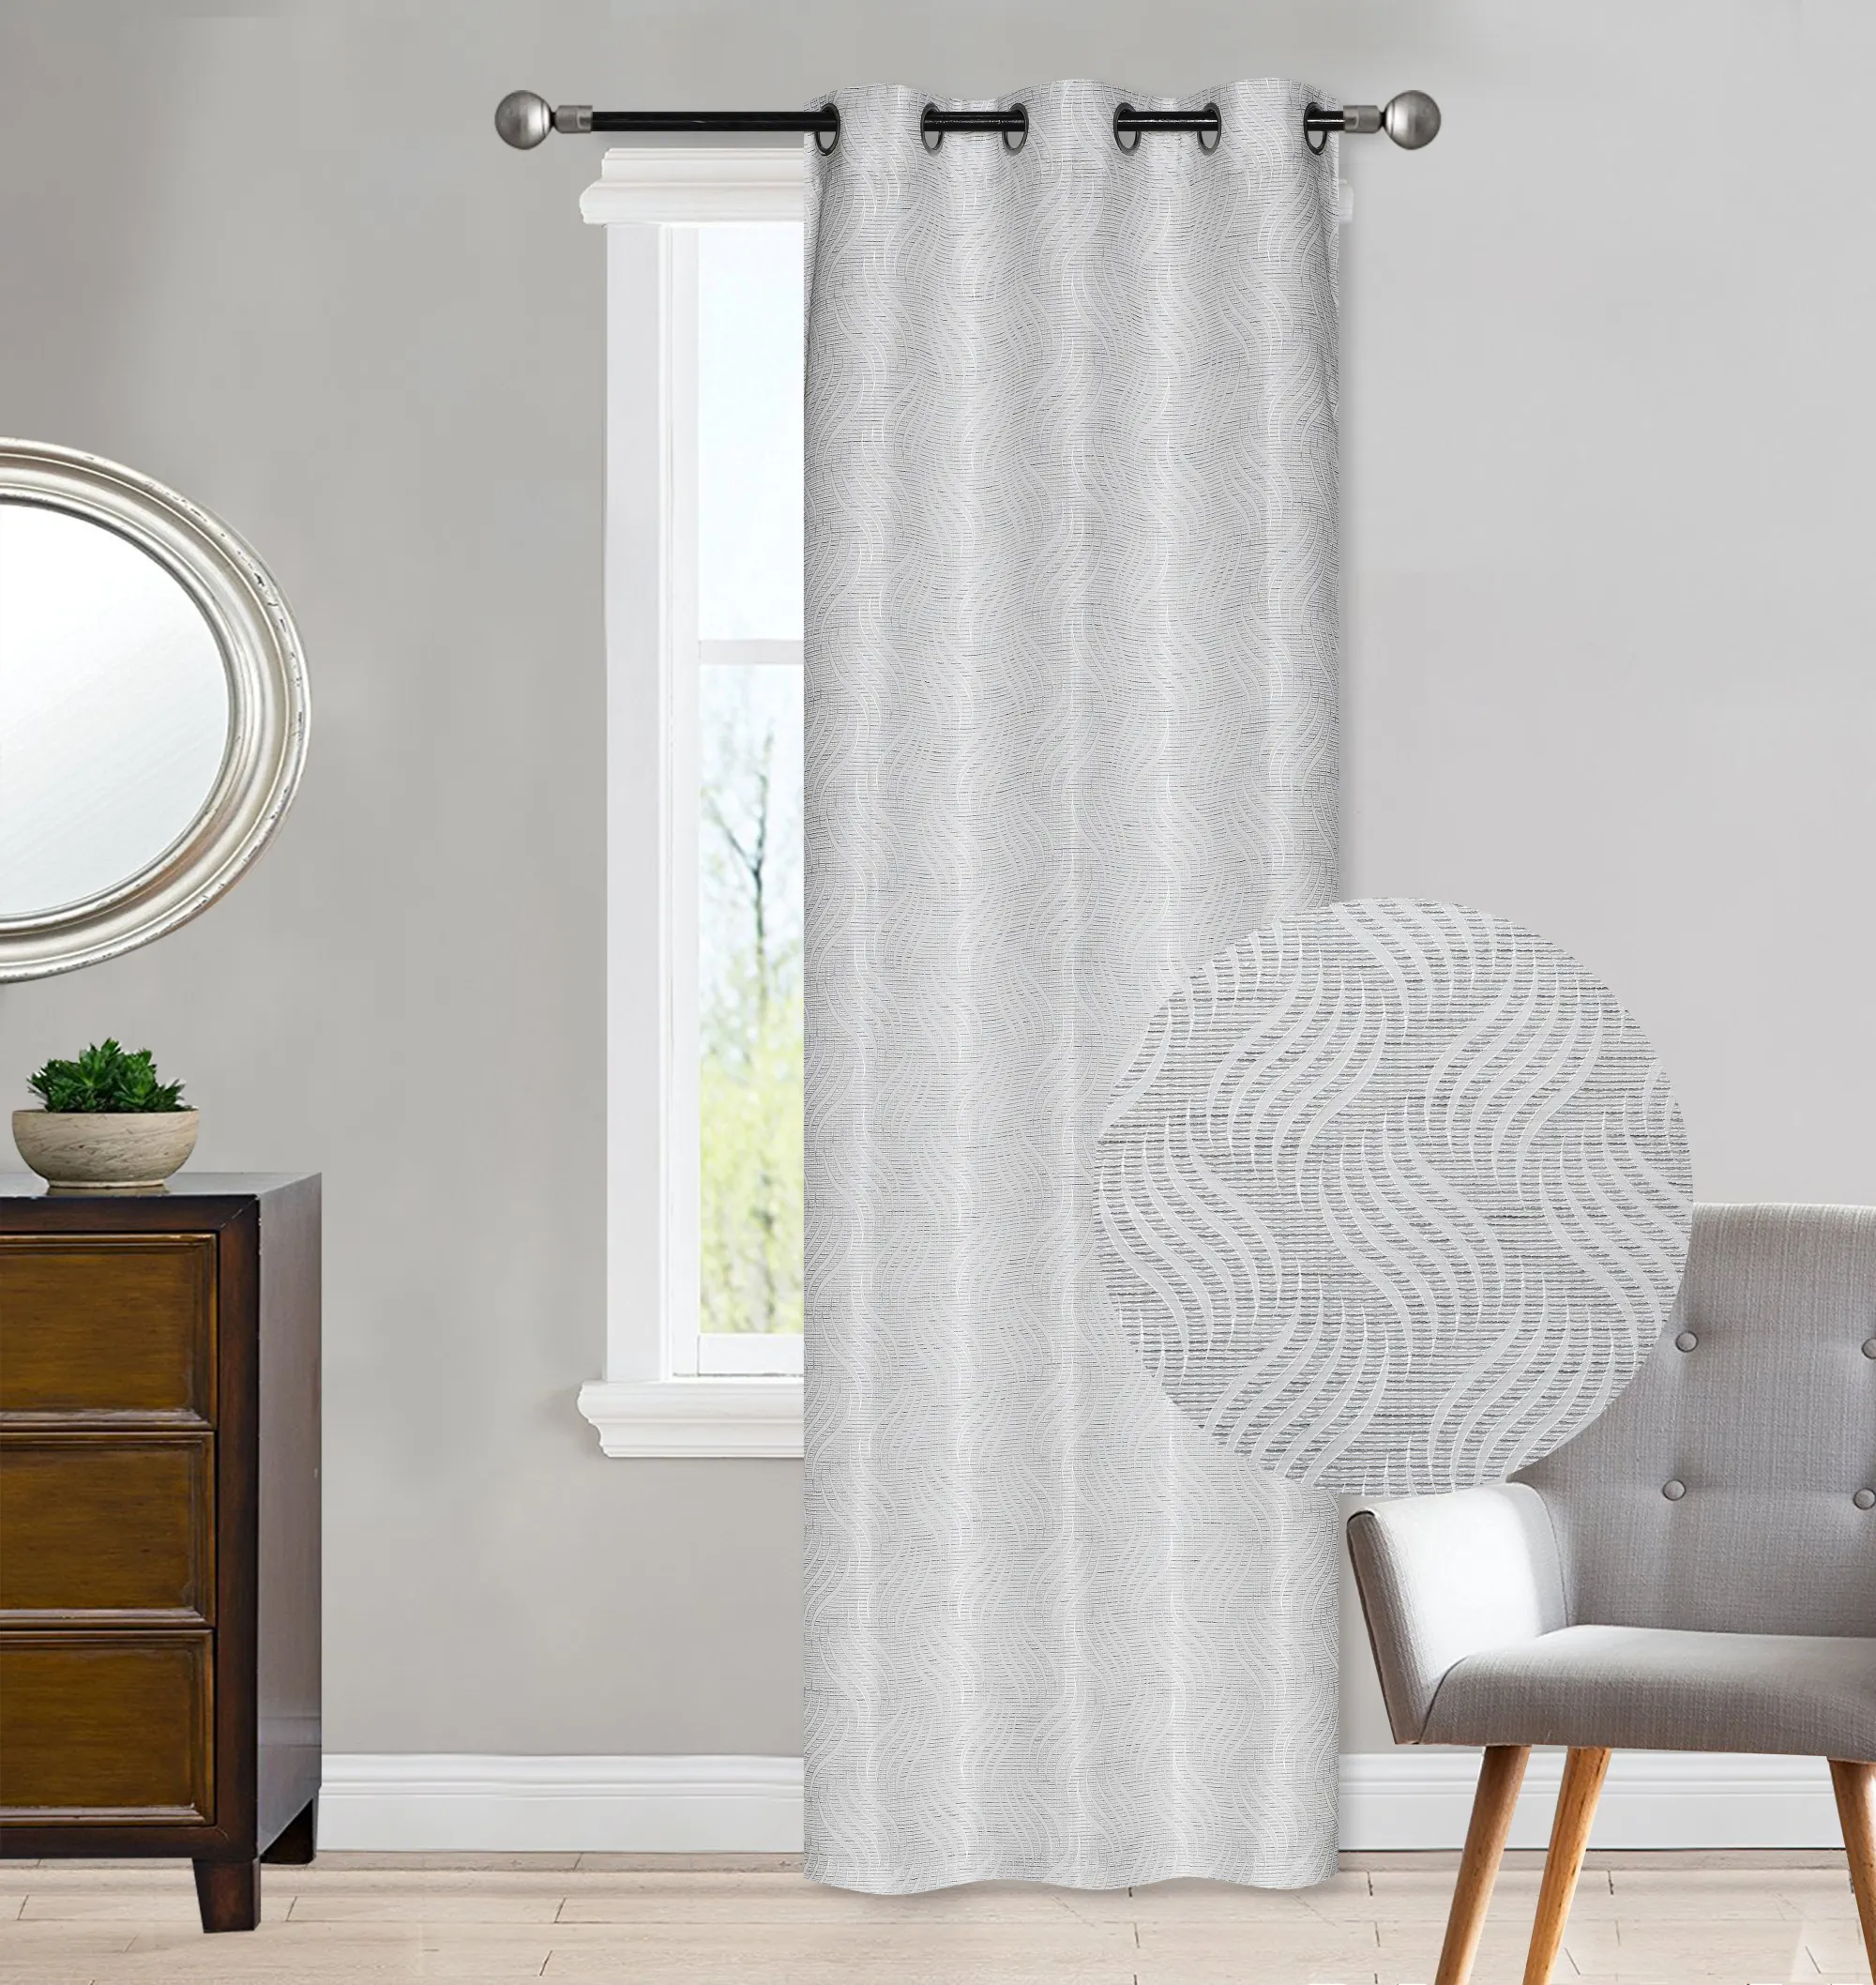 Hot Sales Luxury Curtains house Modern curtain for home, High Quality jacquard Designs WIndow Drape for Living room